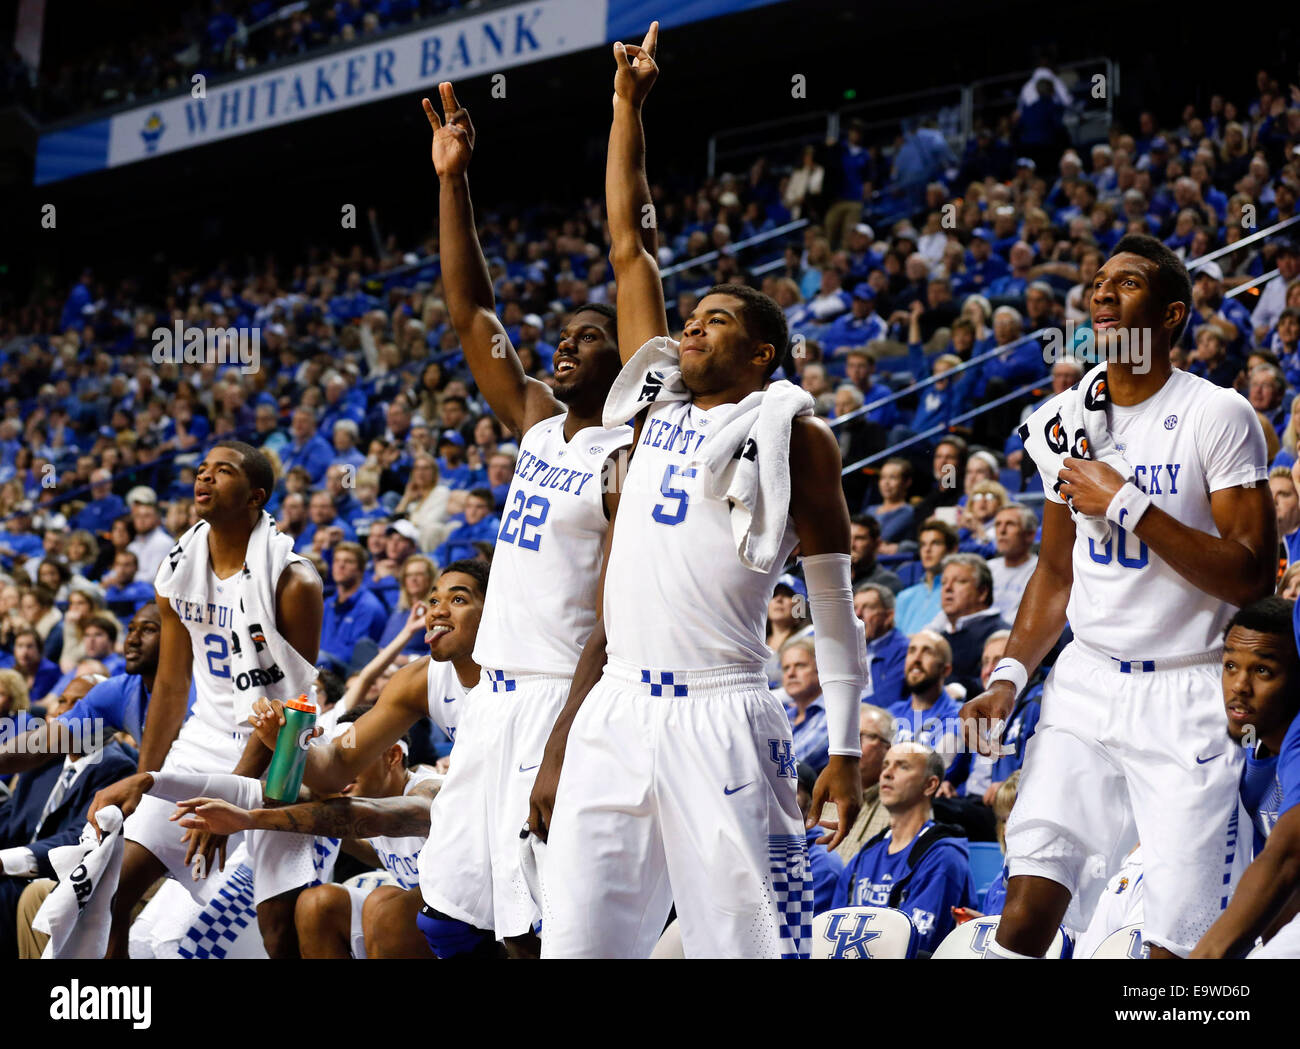 Lexington, KY, USA. 2nd Nov, 2014. The KY bench including Kentucky Wildcats guard Aaron Harrison (2), Kentucky Wildcats forward Alex Poythress (22), Kentucky Wildcats guard Andrew Harrison (5) and Kentucky Wildcats forward Marcus Lee (00) cheered th endear the end of the game as the University of Kentucky played the University of Pikeville in Rupp Arena in Lexington, Ky., Sunday, November 2, 2014. This is second half preseason exhibition basketball. UK won 116-68. Photo by Charles Bertram | Staff. © Lexington Herald-Leader/ZUMA Wire/Alamy Live News Stock Photo